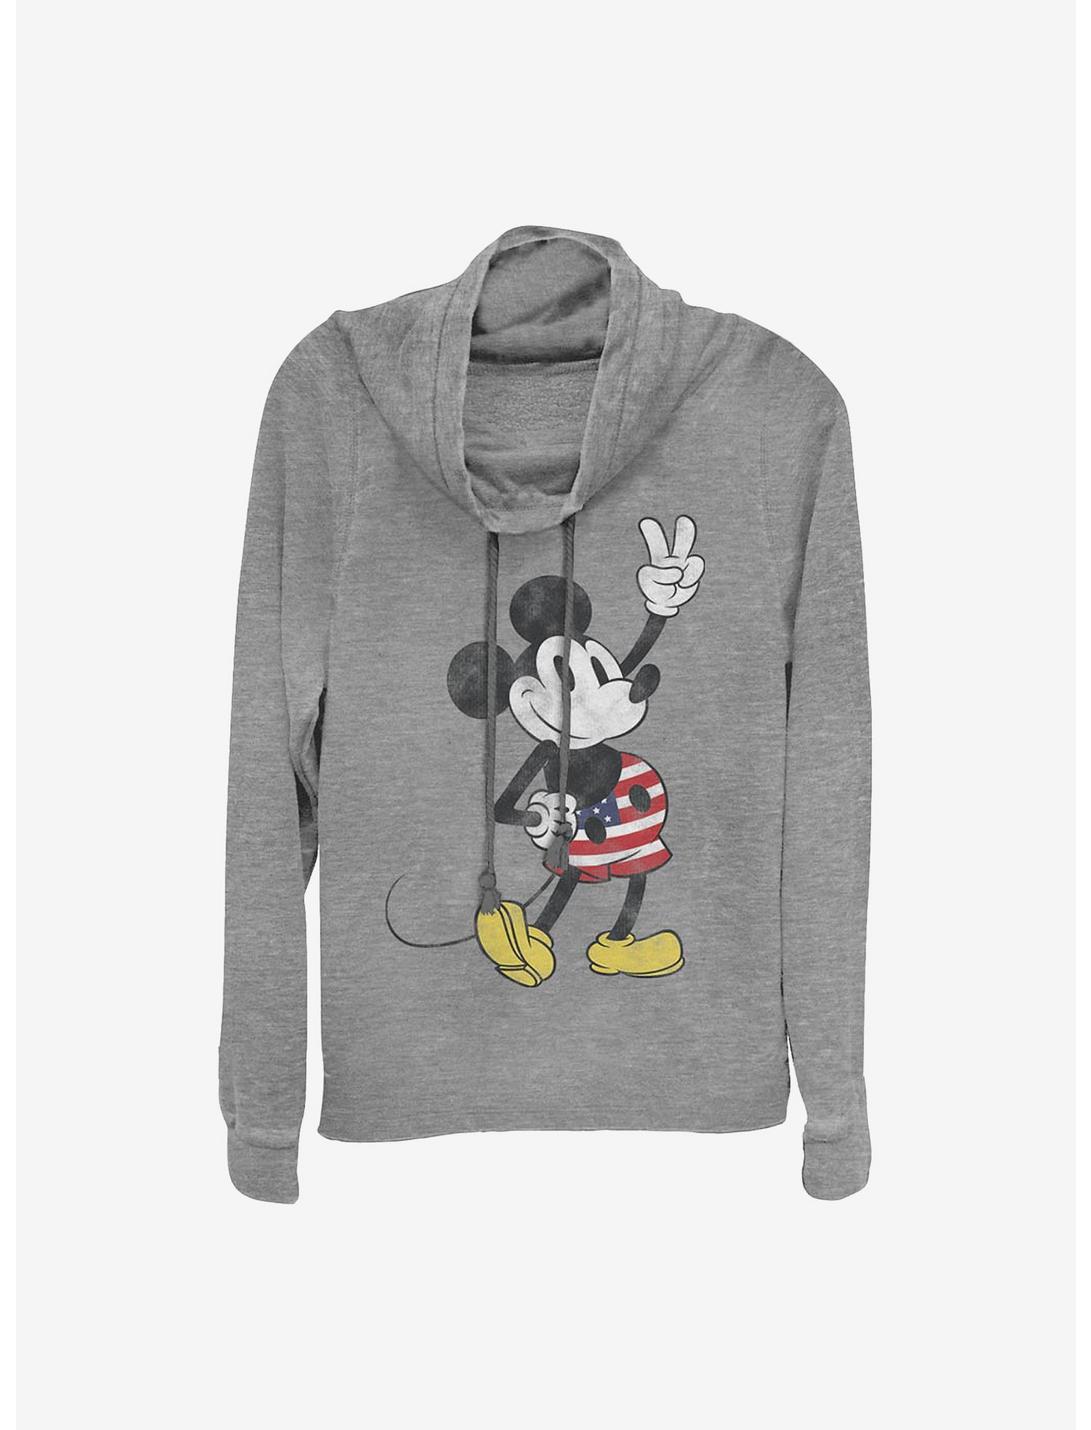 Disney Mickey Mouse American Mouse Cowlneck Long-Sleeve Girls Top, GRAY HTR, hi-res